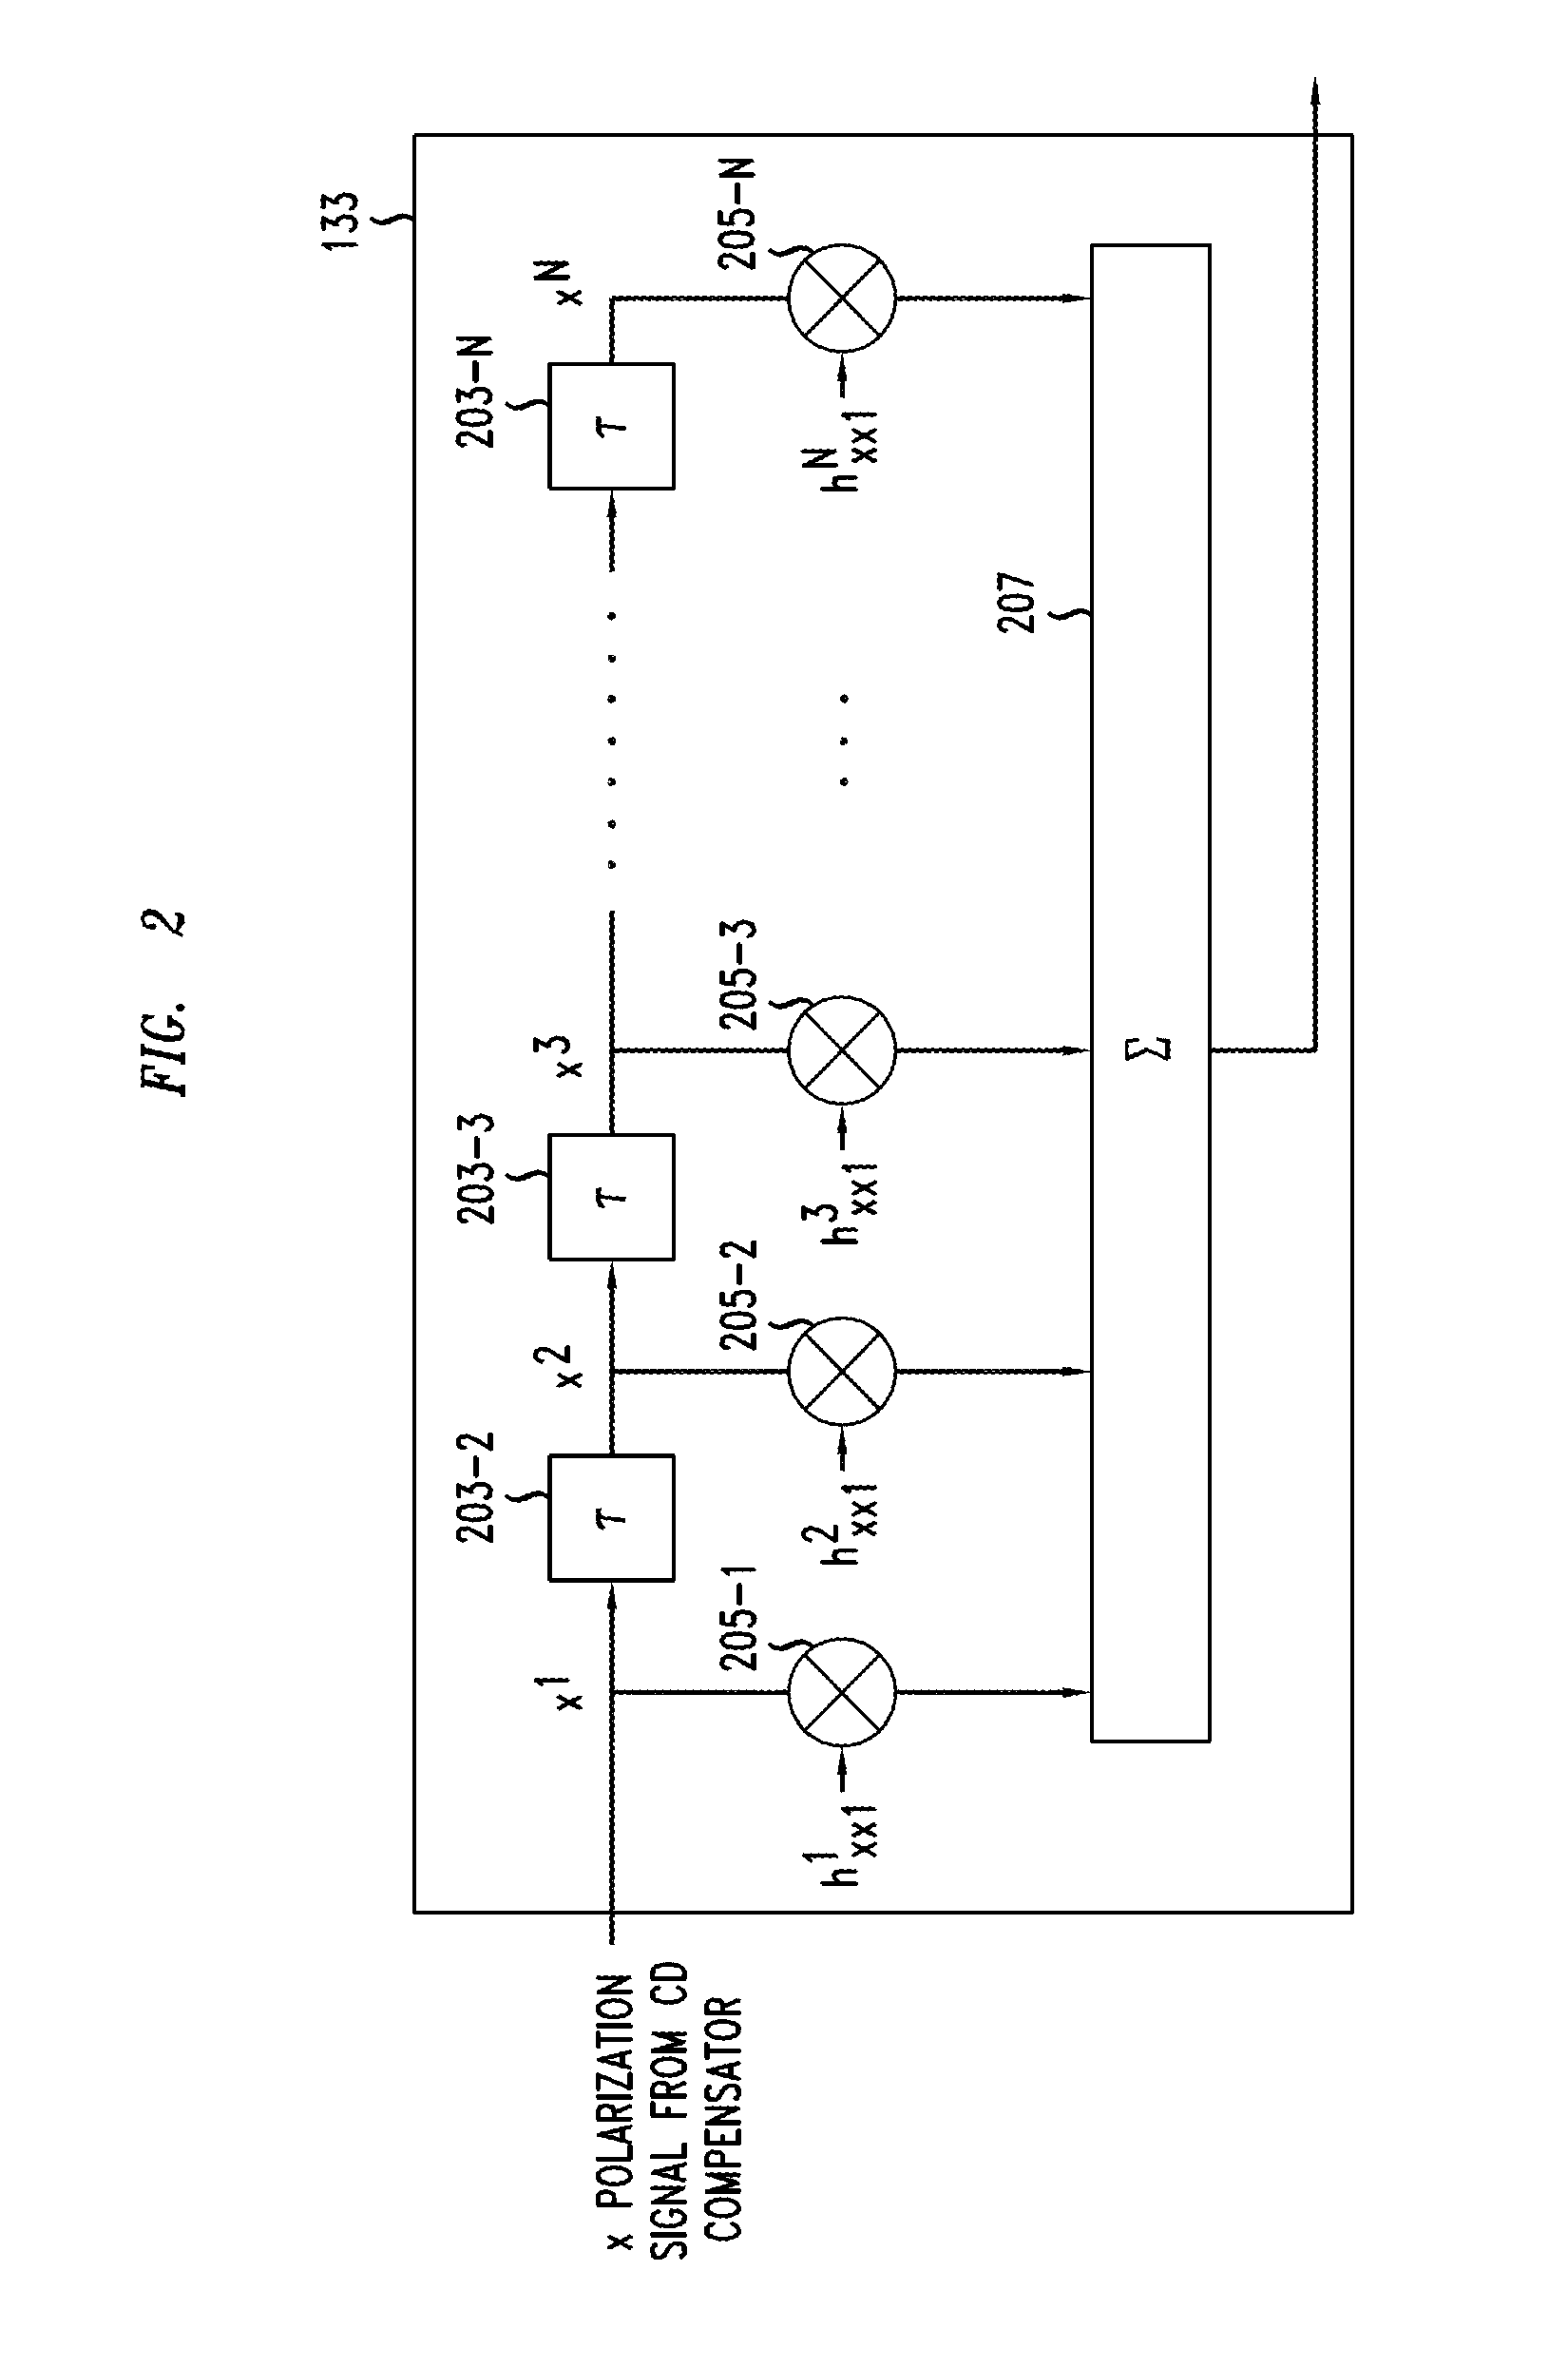 Method And Apparatus For Polarization-Division-Multiplexed Optical Receivers